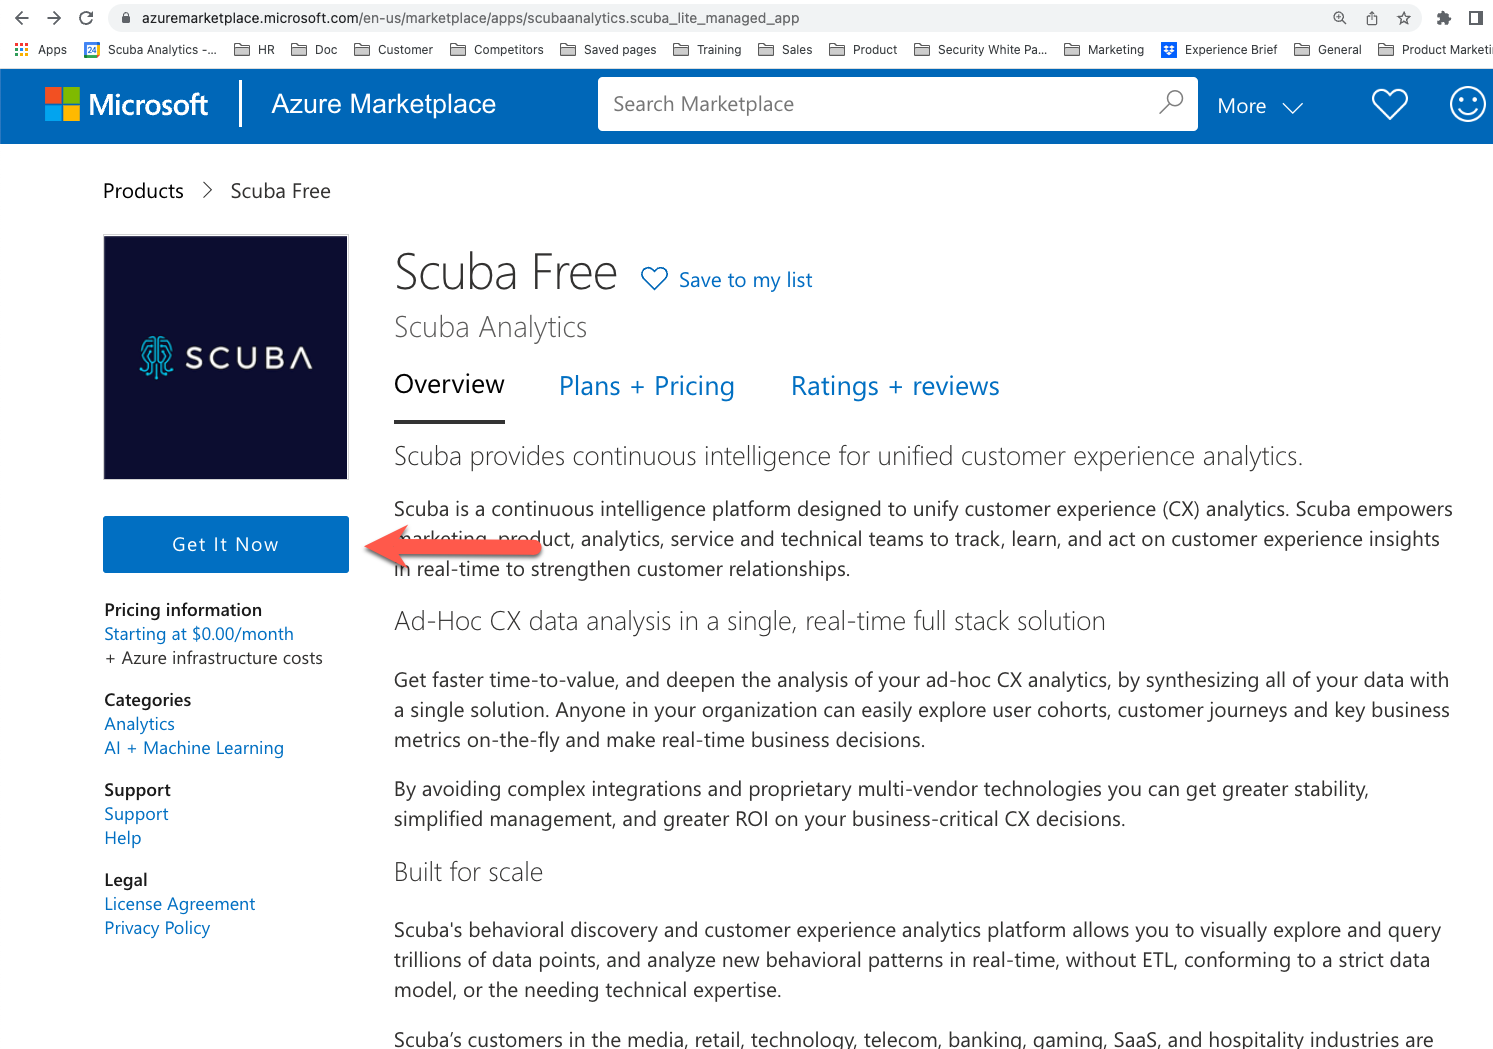 get it now page for scuba free on azure marketplace page